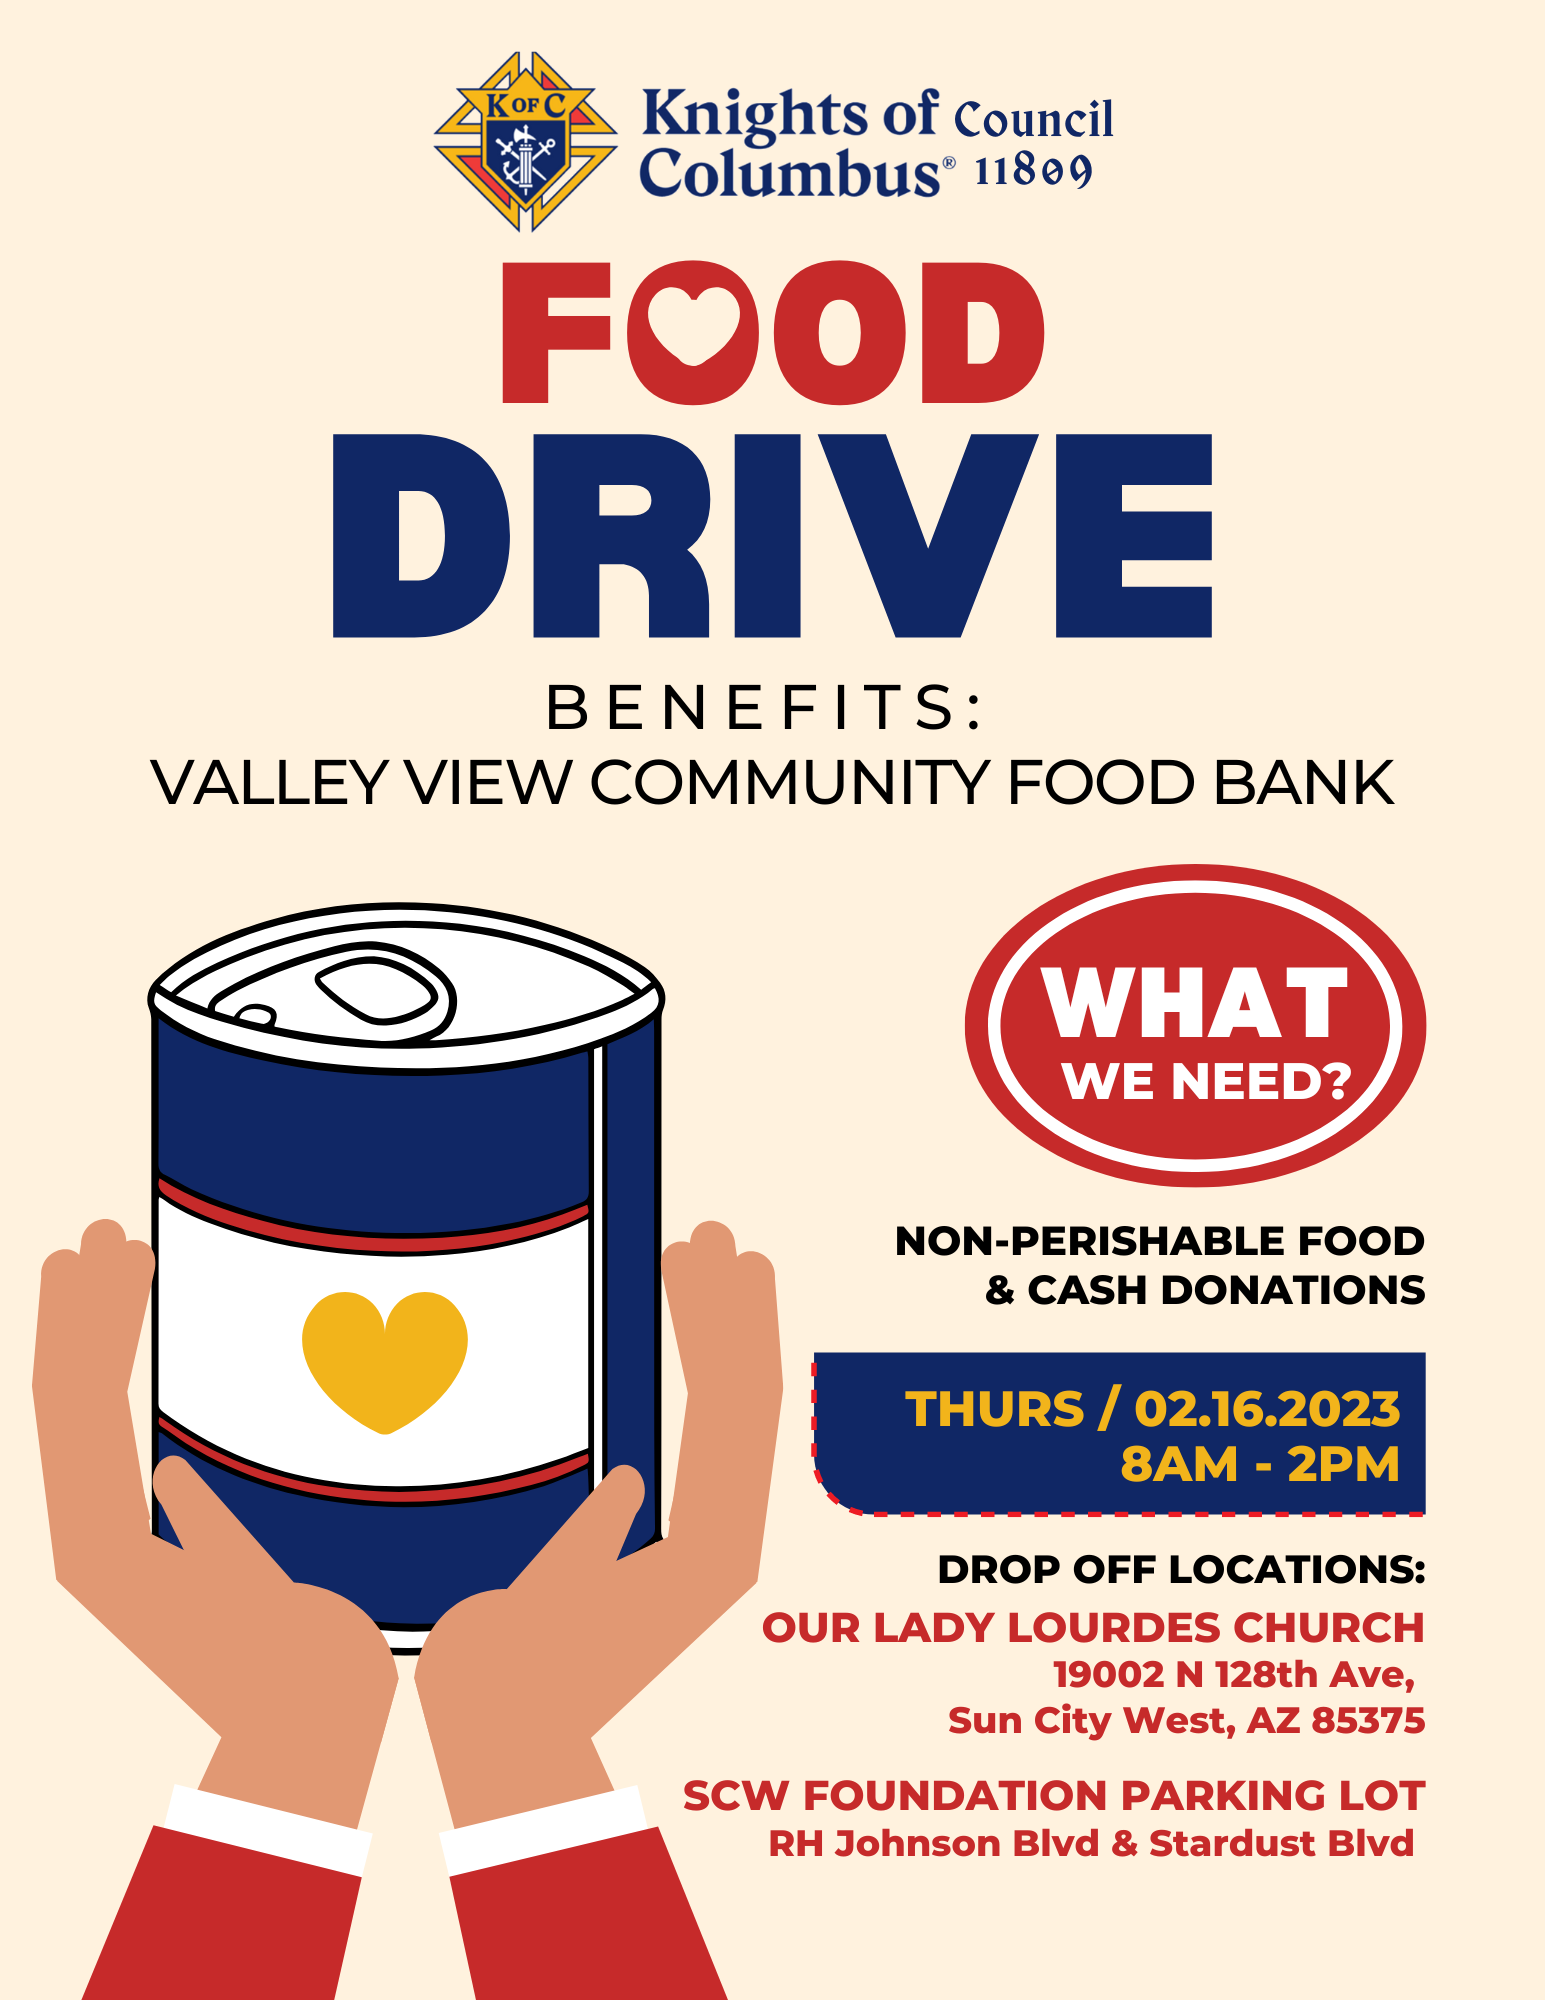 The Knights of Columbus Council 11809 is hosting a food drive on February 16, 2023, from 8 AM until 2 PM. The donations collected<br />
will benefit the Valley View Community Food Bank.